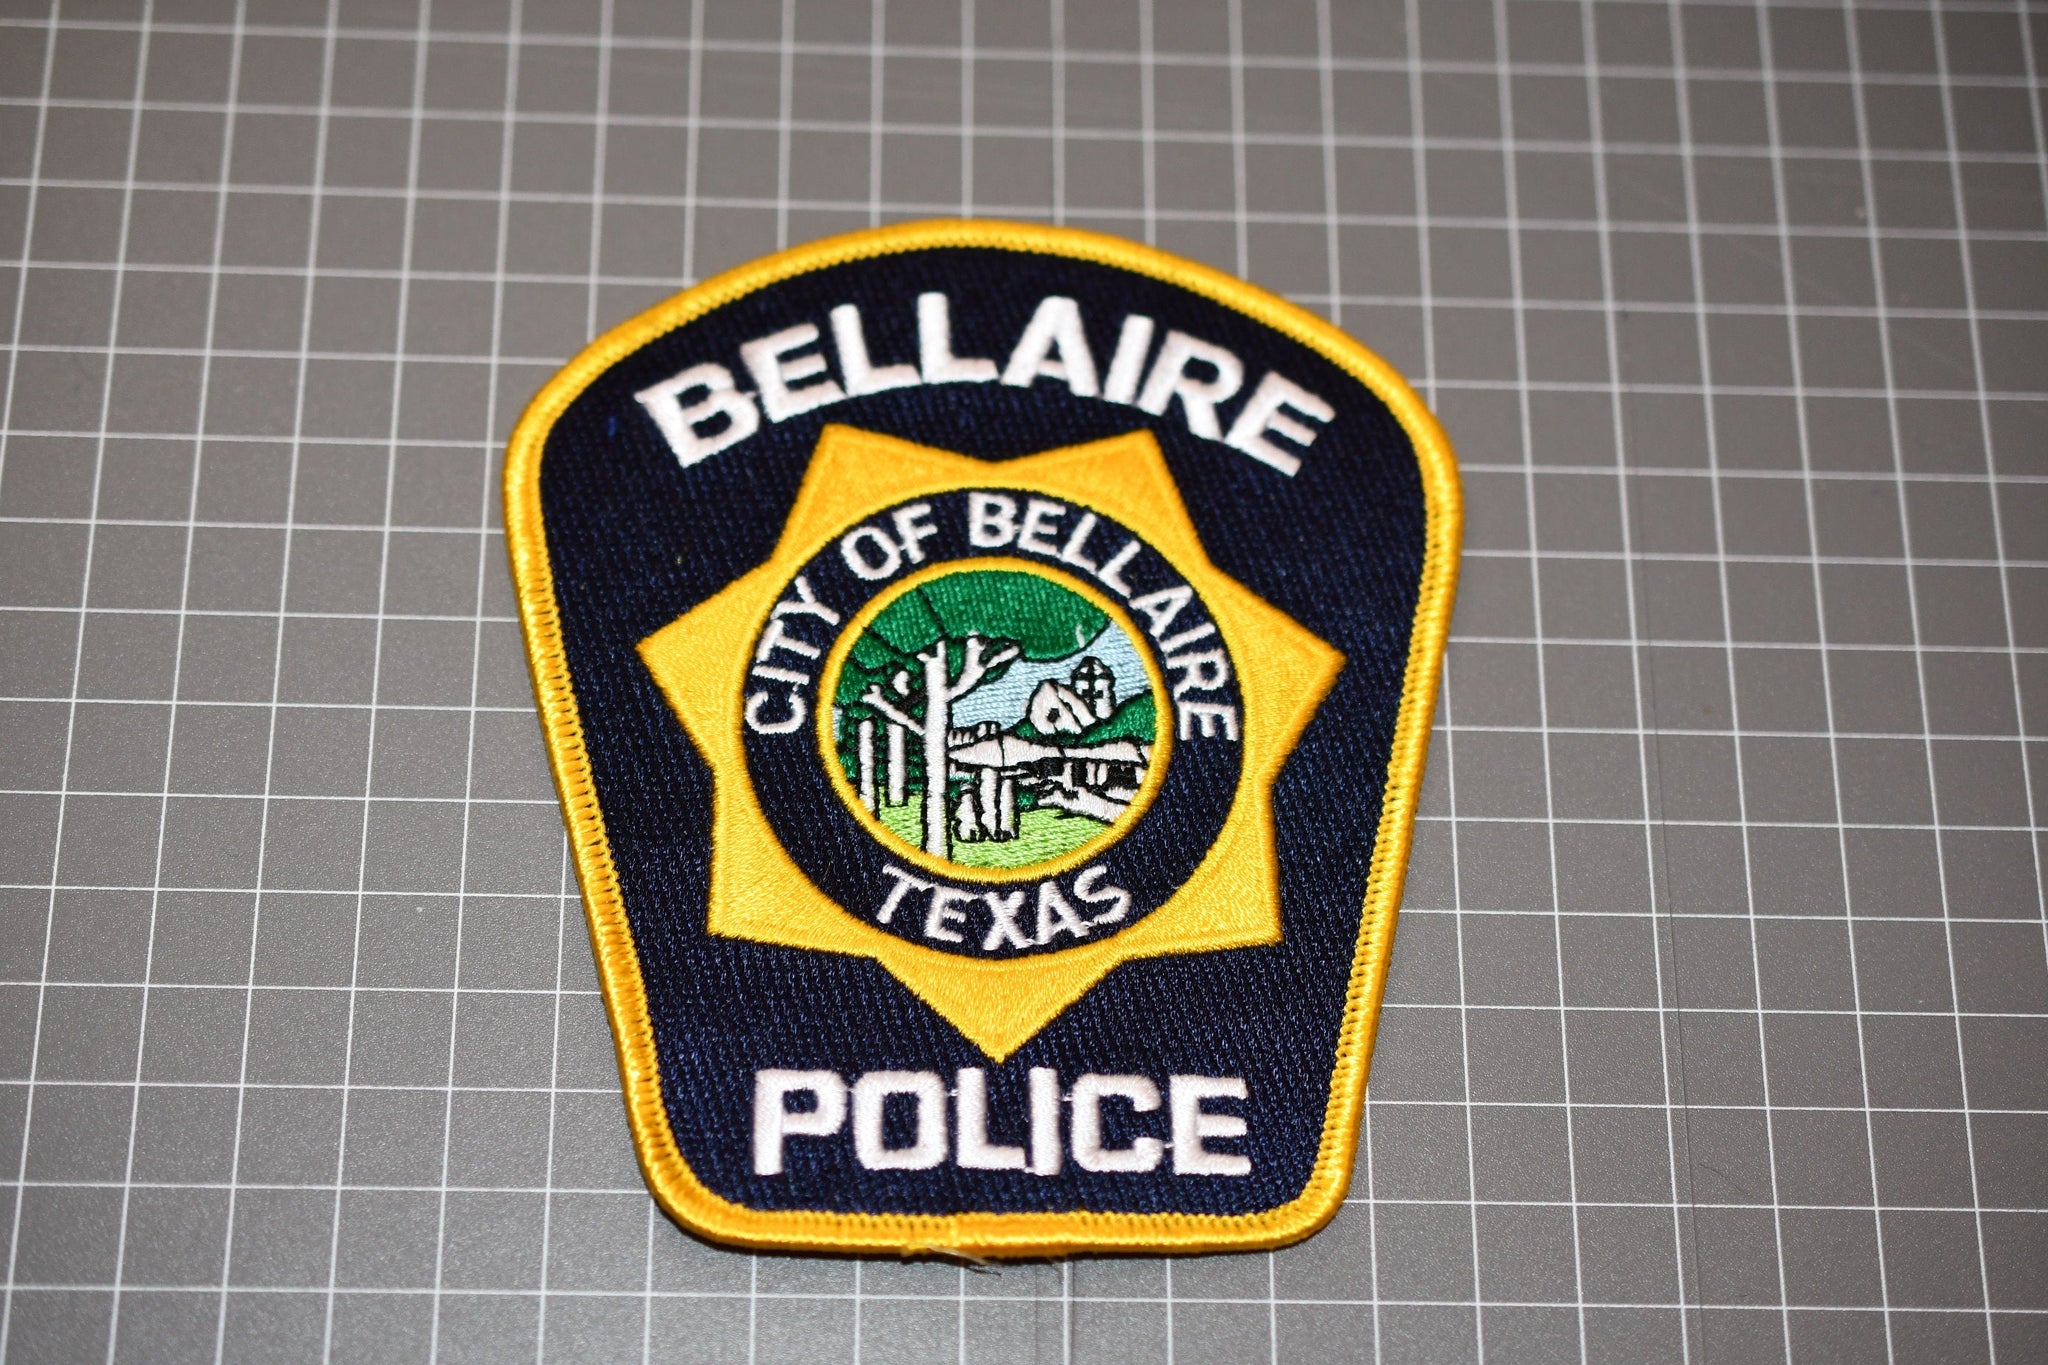 City Of Bellaire Texas Police Patch (B23-163)